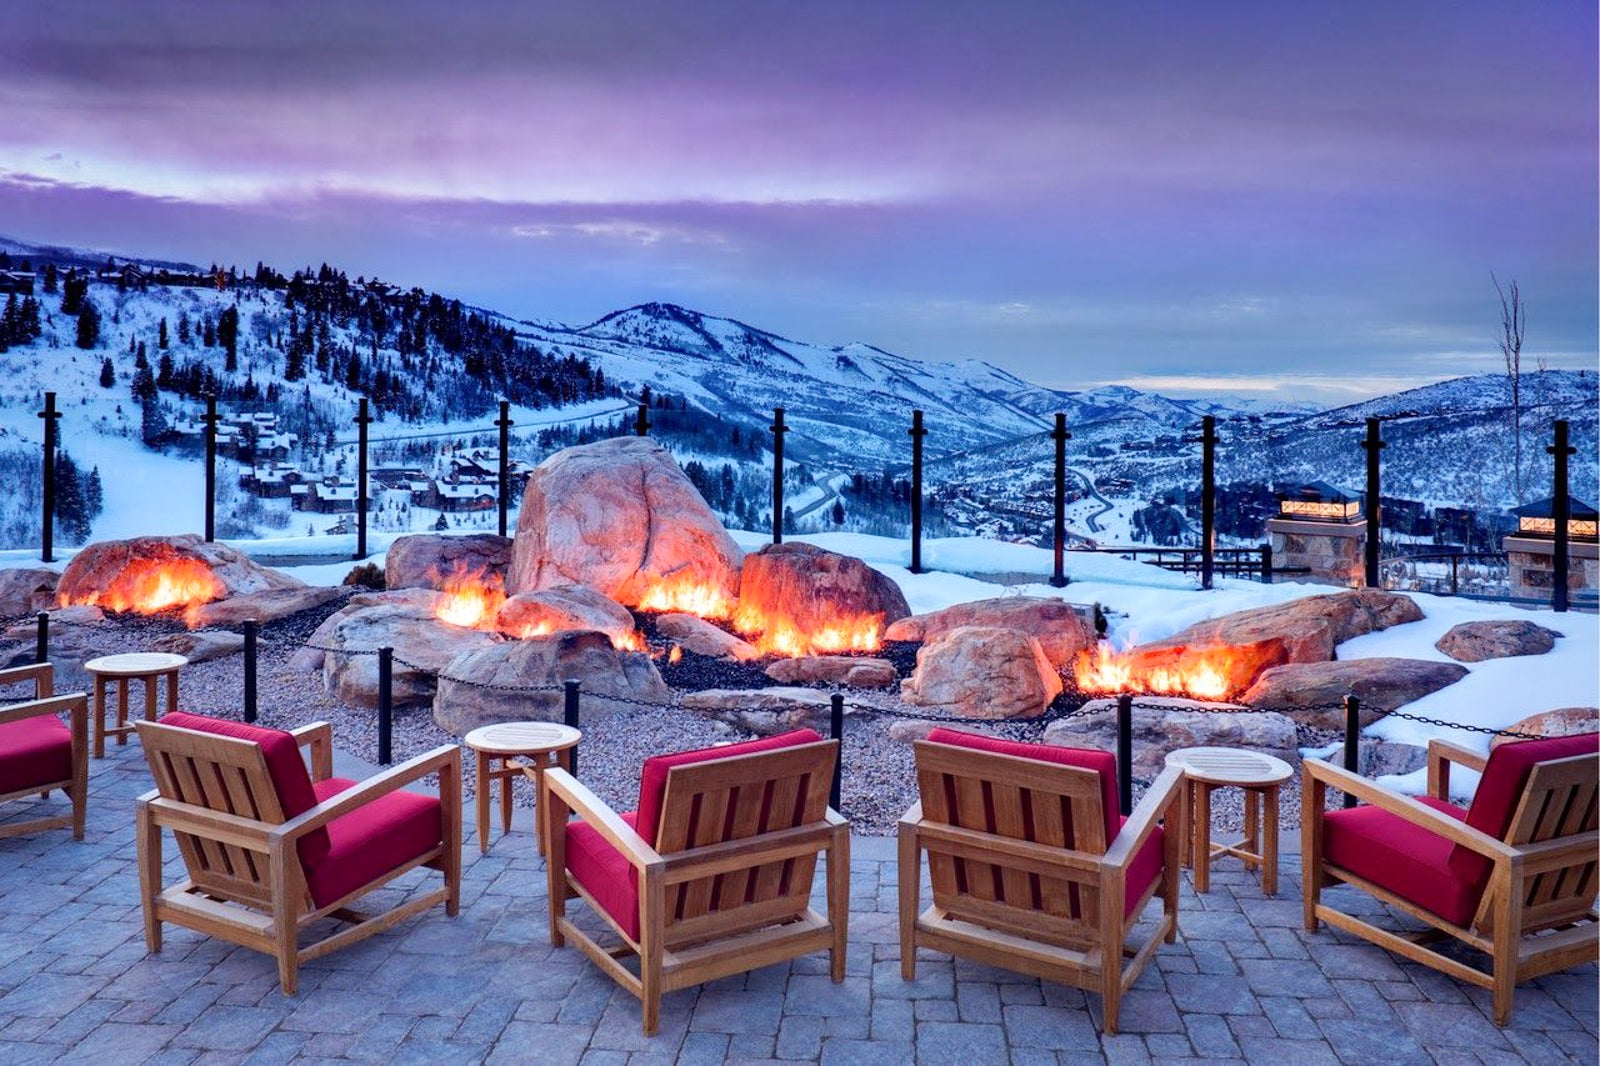 Stay at the St. Regis Deer Valley on points while skiing (Photo courtesy of St. Regis Deer Valley)